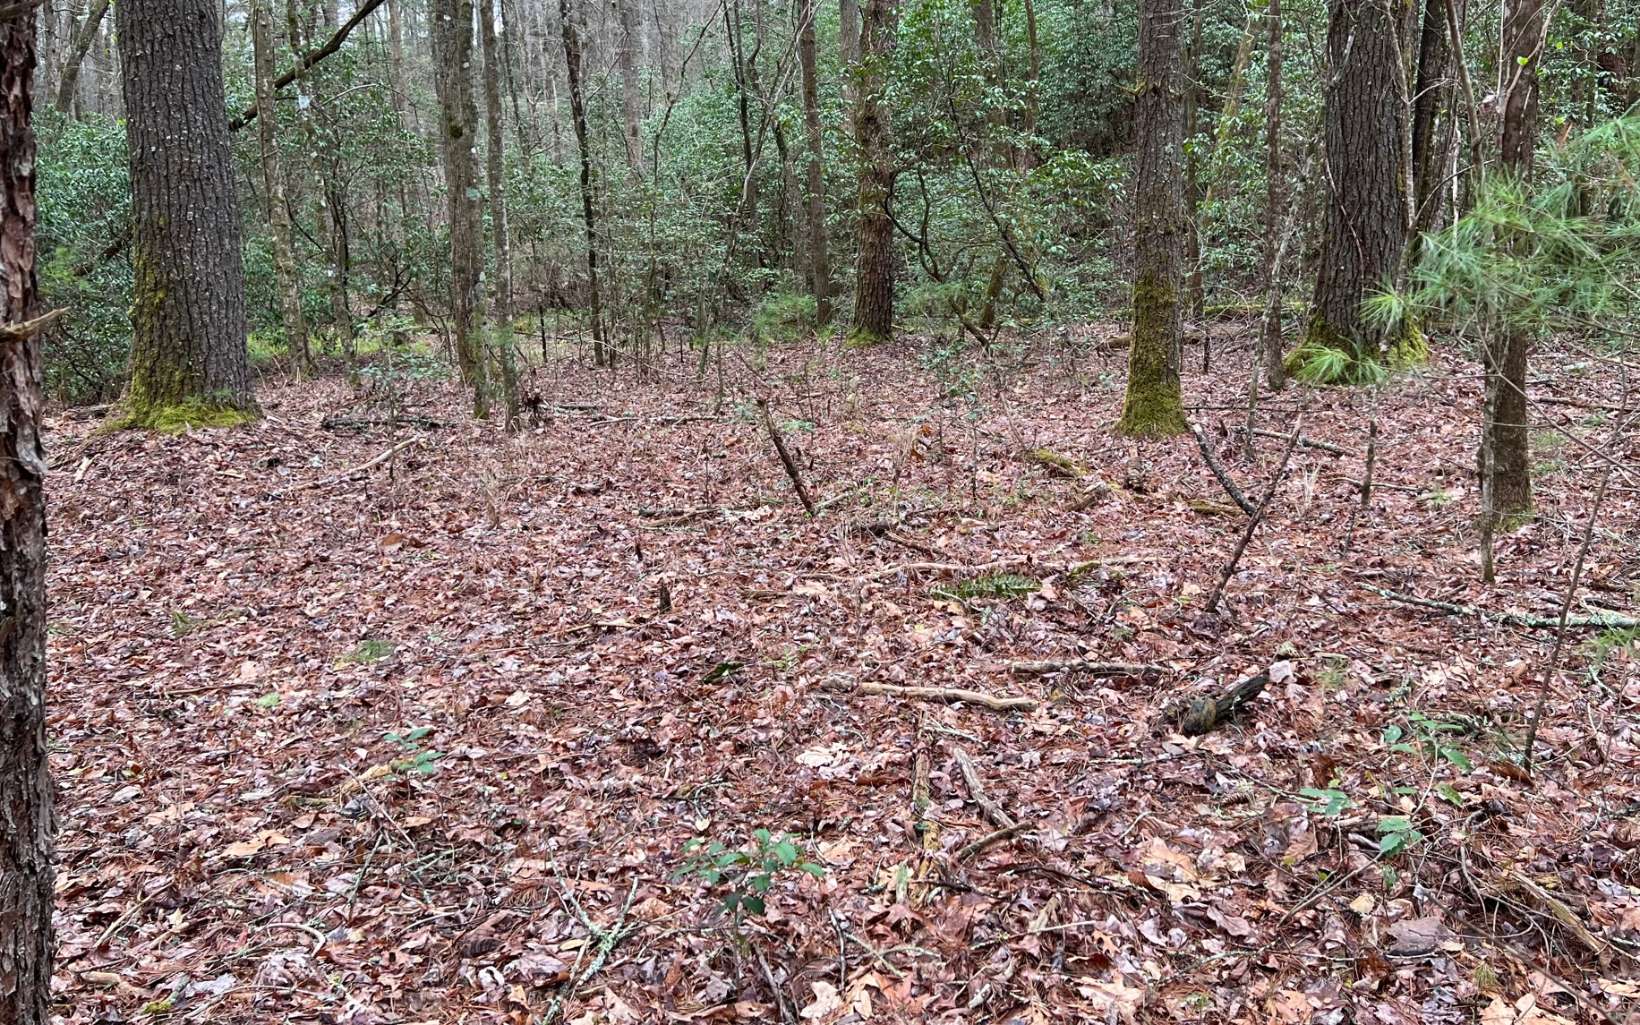 WELCOME HOME! Looking for the perfect place in the beautiful North Ga Mountains to build your long over due dream home? Come check out the 2.92 acres surrounded by mountain laurel and lots of hardwoods to offer plenty of privacy. Located in a gated mountain community, this lot affords lots of road frontage and two small branches and less than a half mile to beautiful and noisy East Mountaintown Creek. Grab your house plans and call your builder and get this dream of yours started!